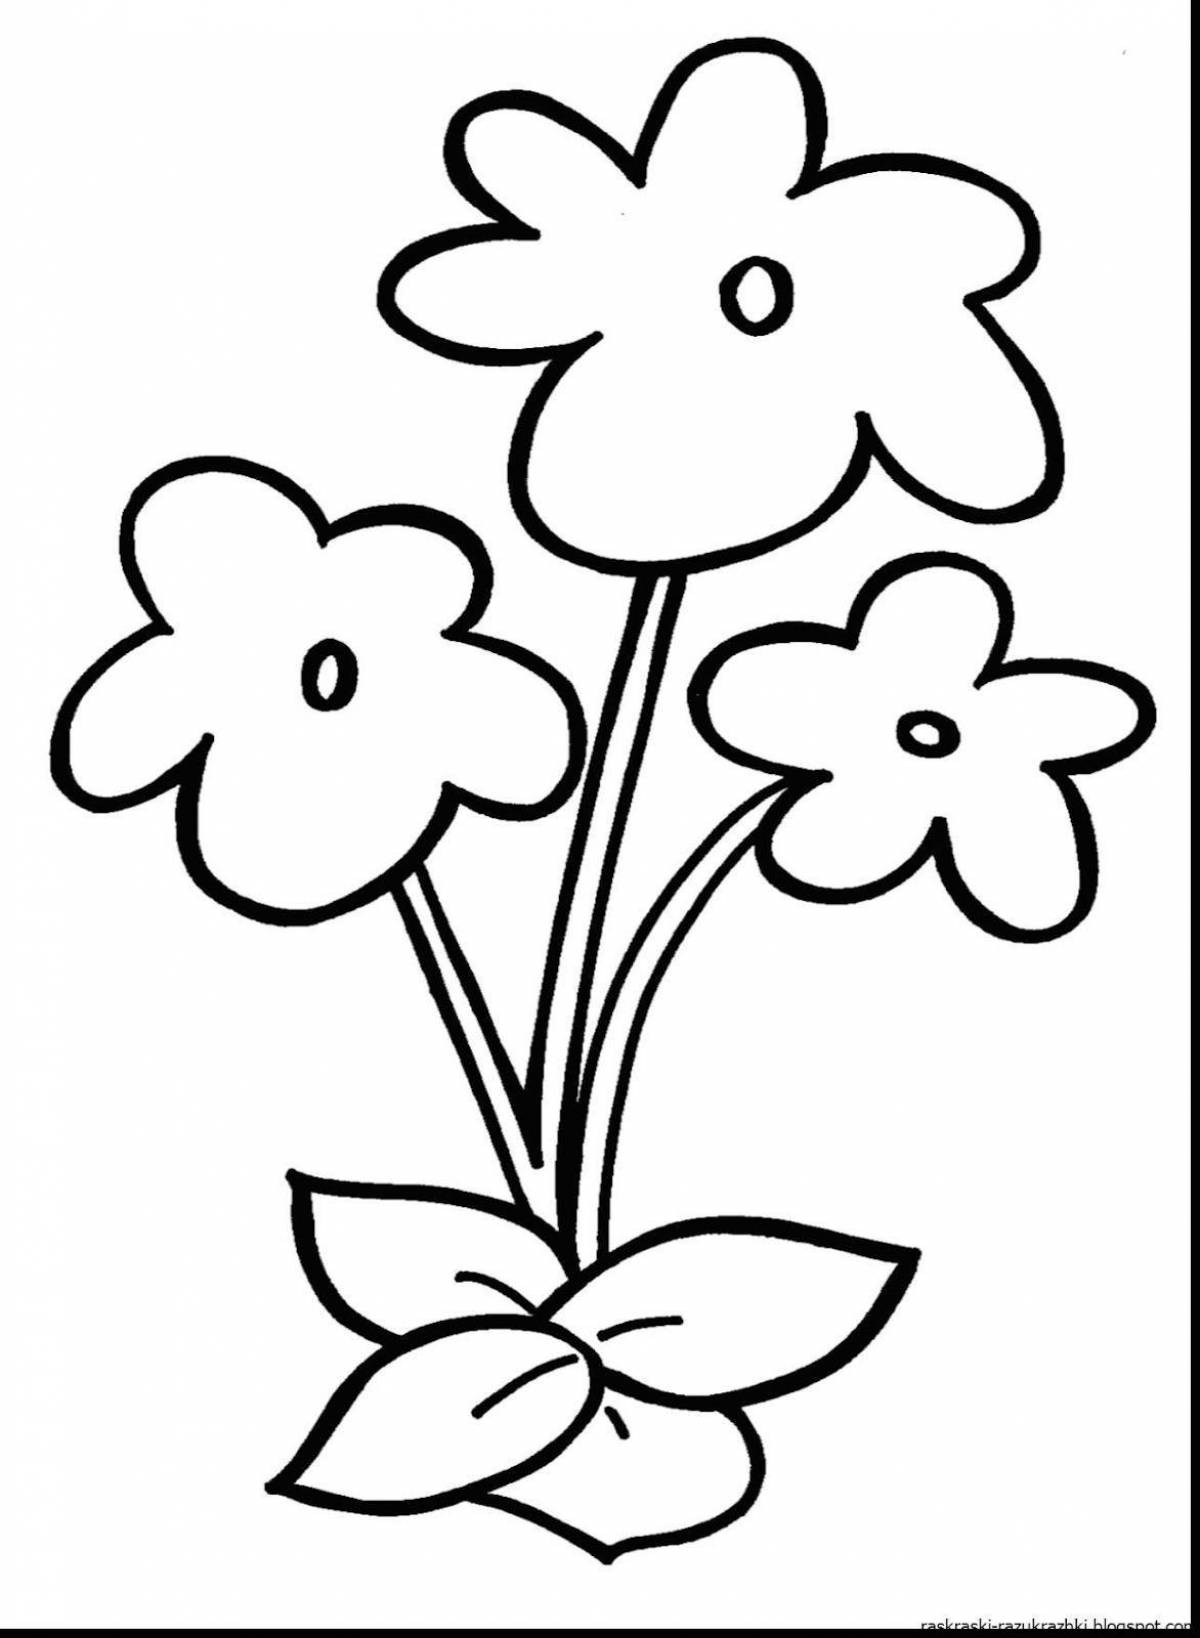 Delightful coloring flowers drawing